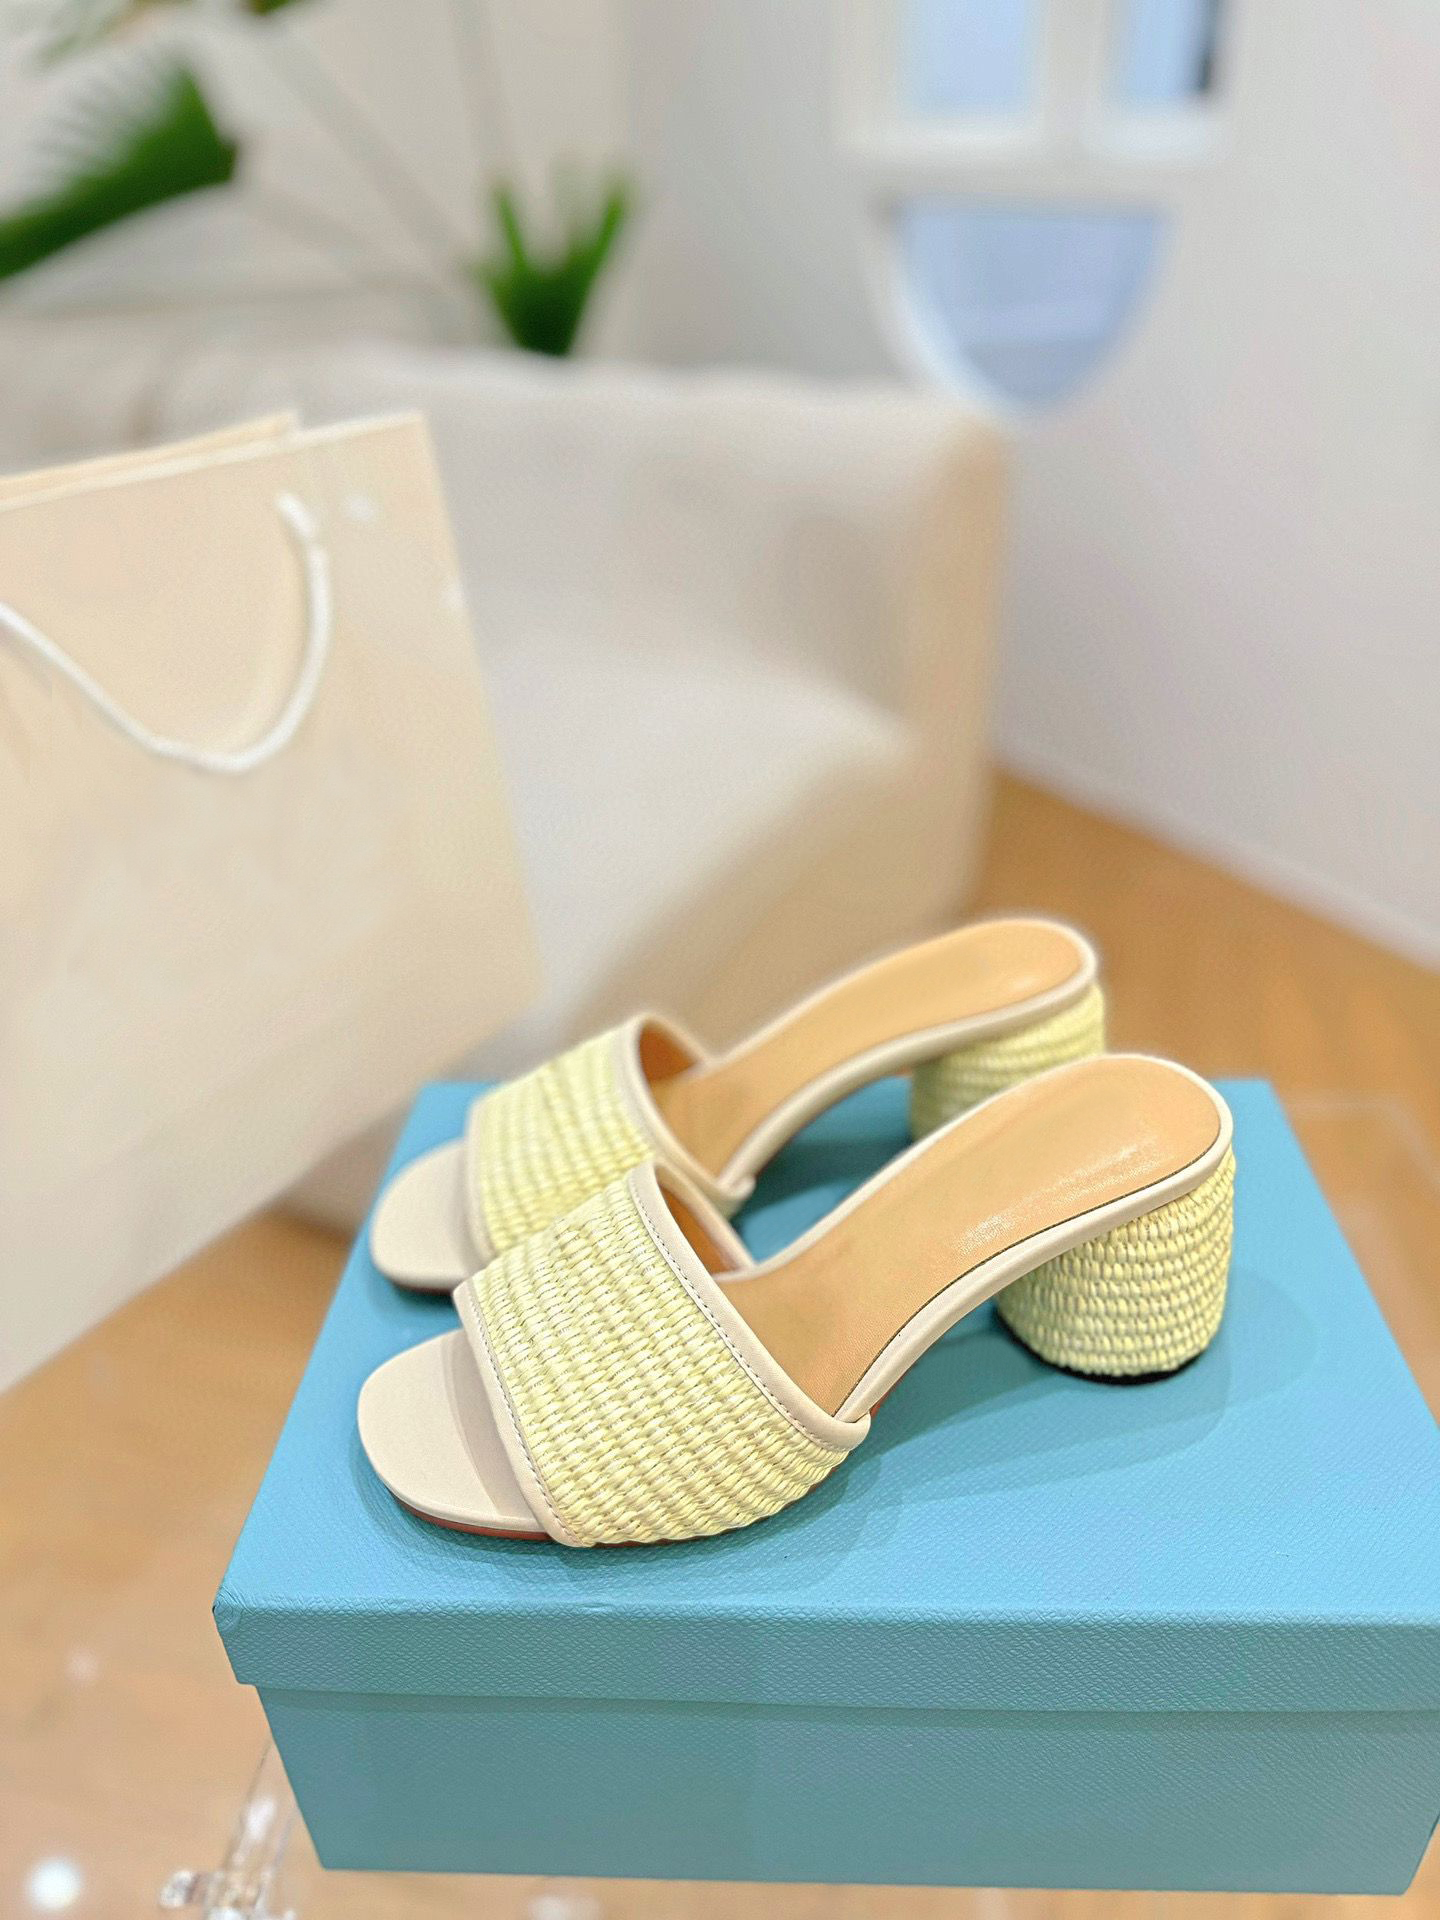 designer slipper women Half slippers new 100% leather Thick heels Metal Slides woman shoe beach Lazy Sandals High heeled shoes Large size 34-41 With box Grass weaving